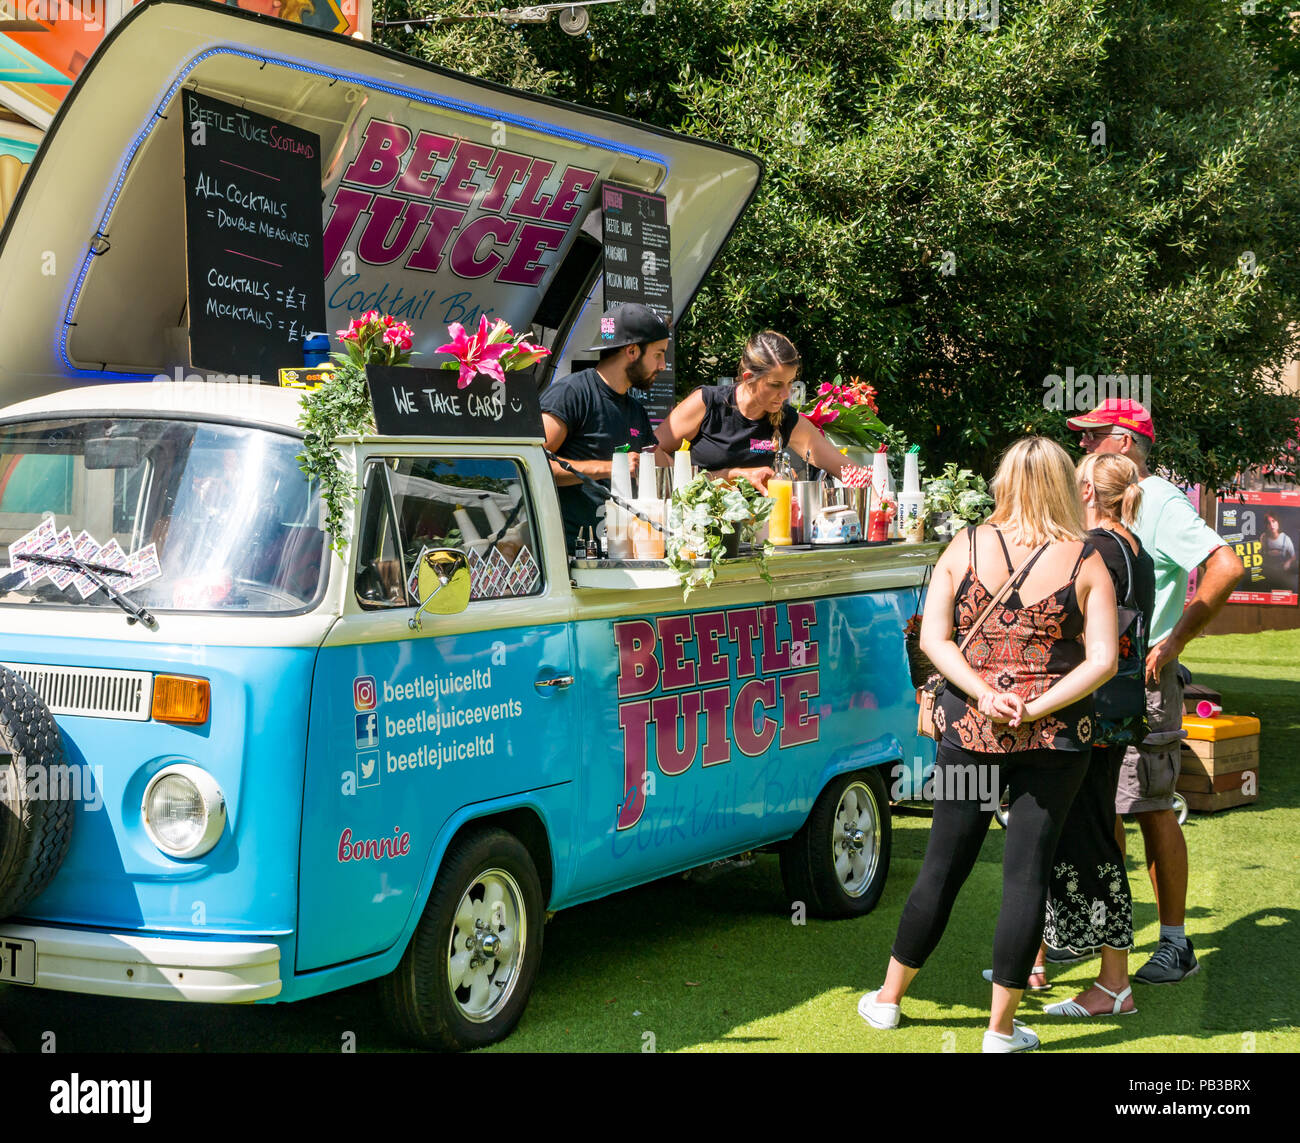 Edinburgh, UK. 26th July 2018. Edinburgh Food Festival 2018 in George Square Gardens, Edinburgh, Scotland, United Kingdom. There are food stalls with over 20 local food and drink producers in the free outdoor event. Customers at the Beetle Juice cocktail camper van bar Stock Photo